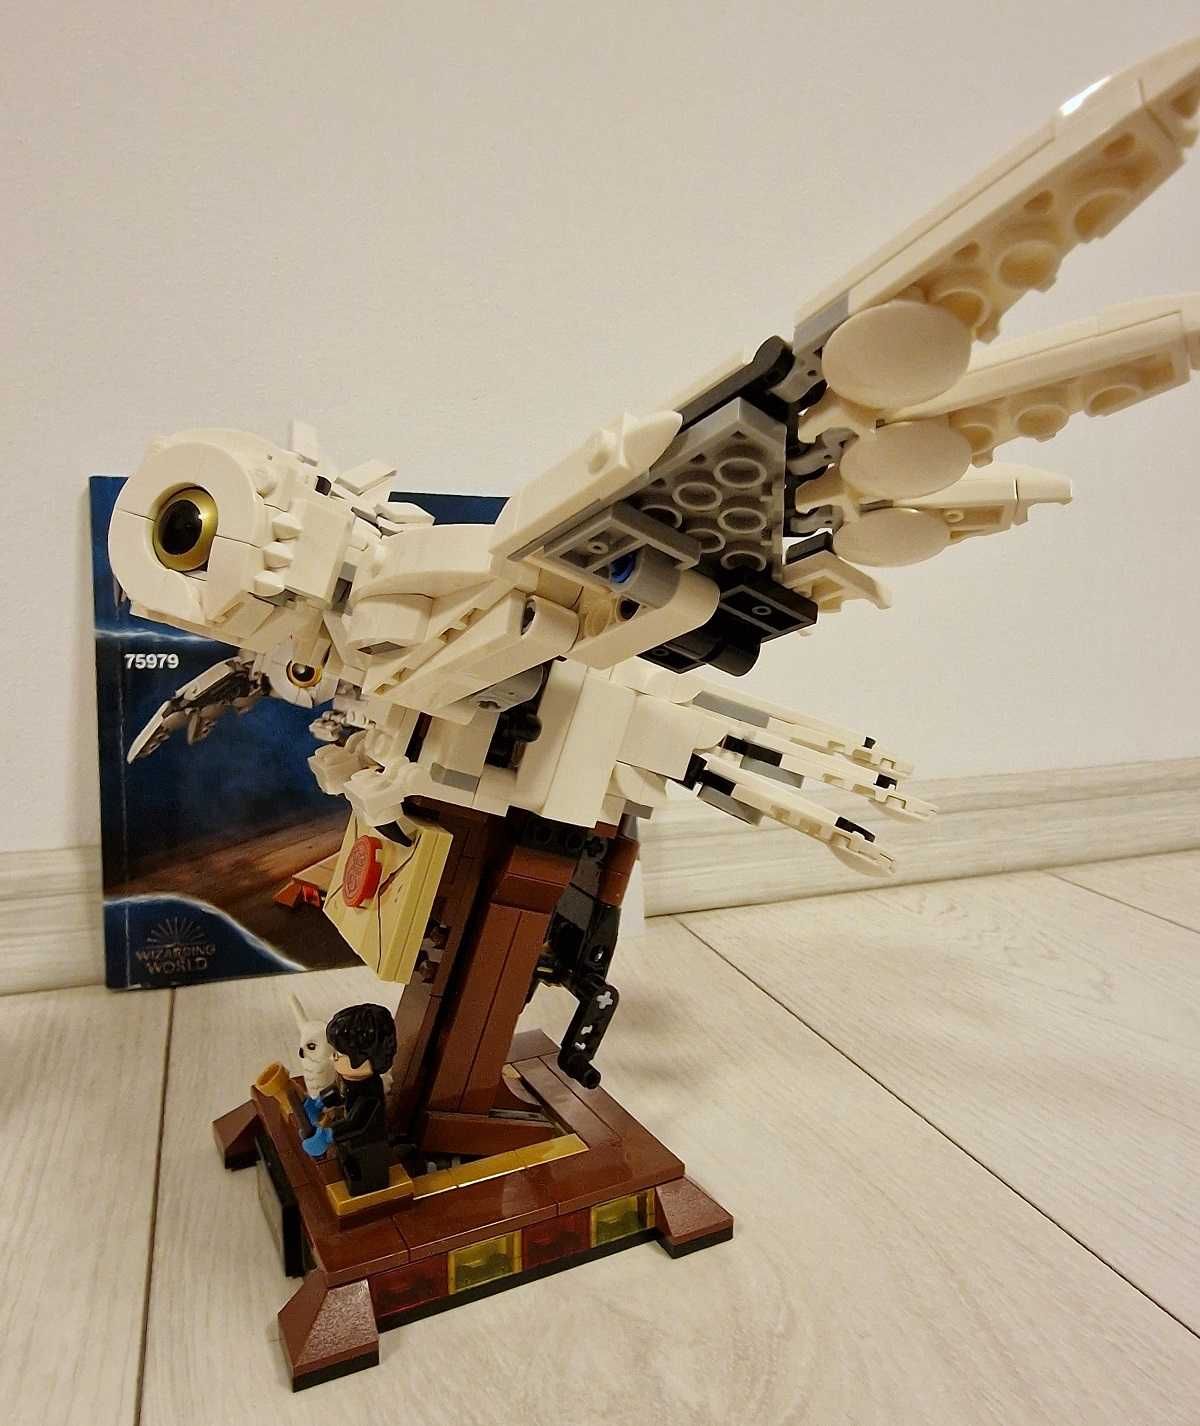 LEGO Harry Potter 75979 Hedwig 630 piese (recomandat 10+)